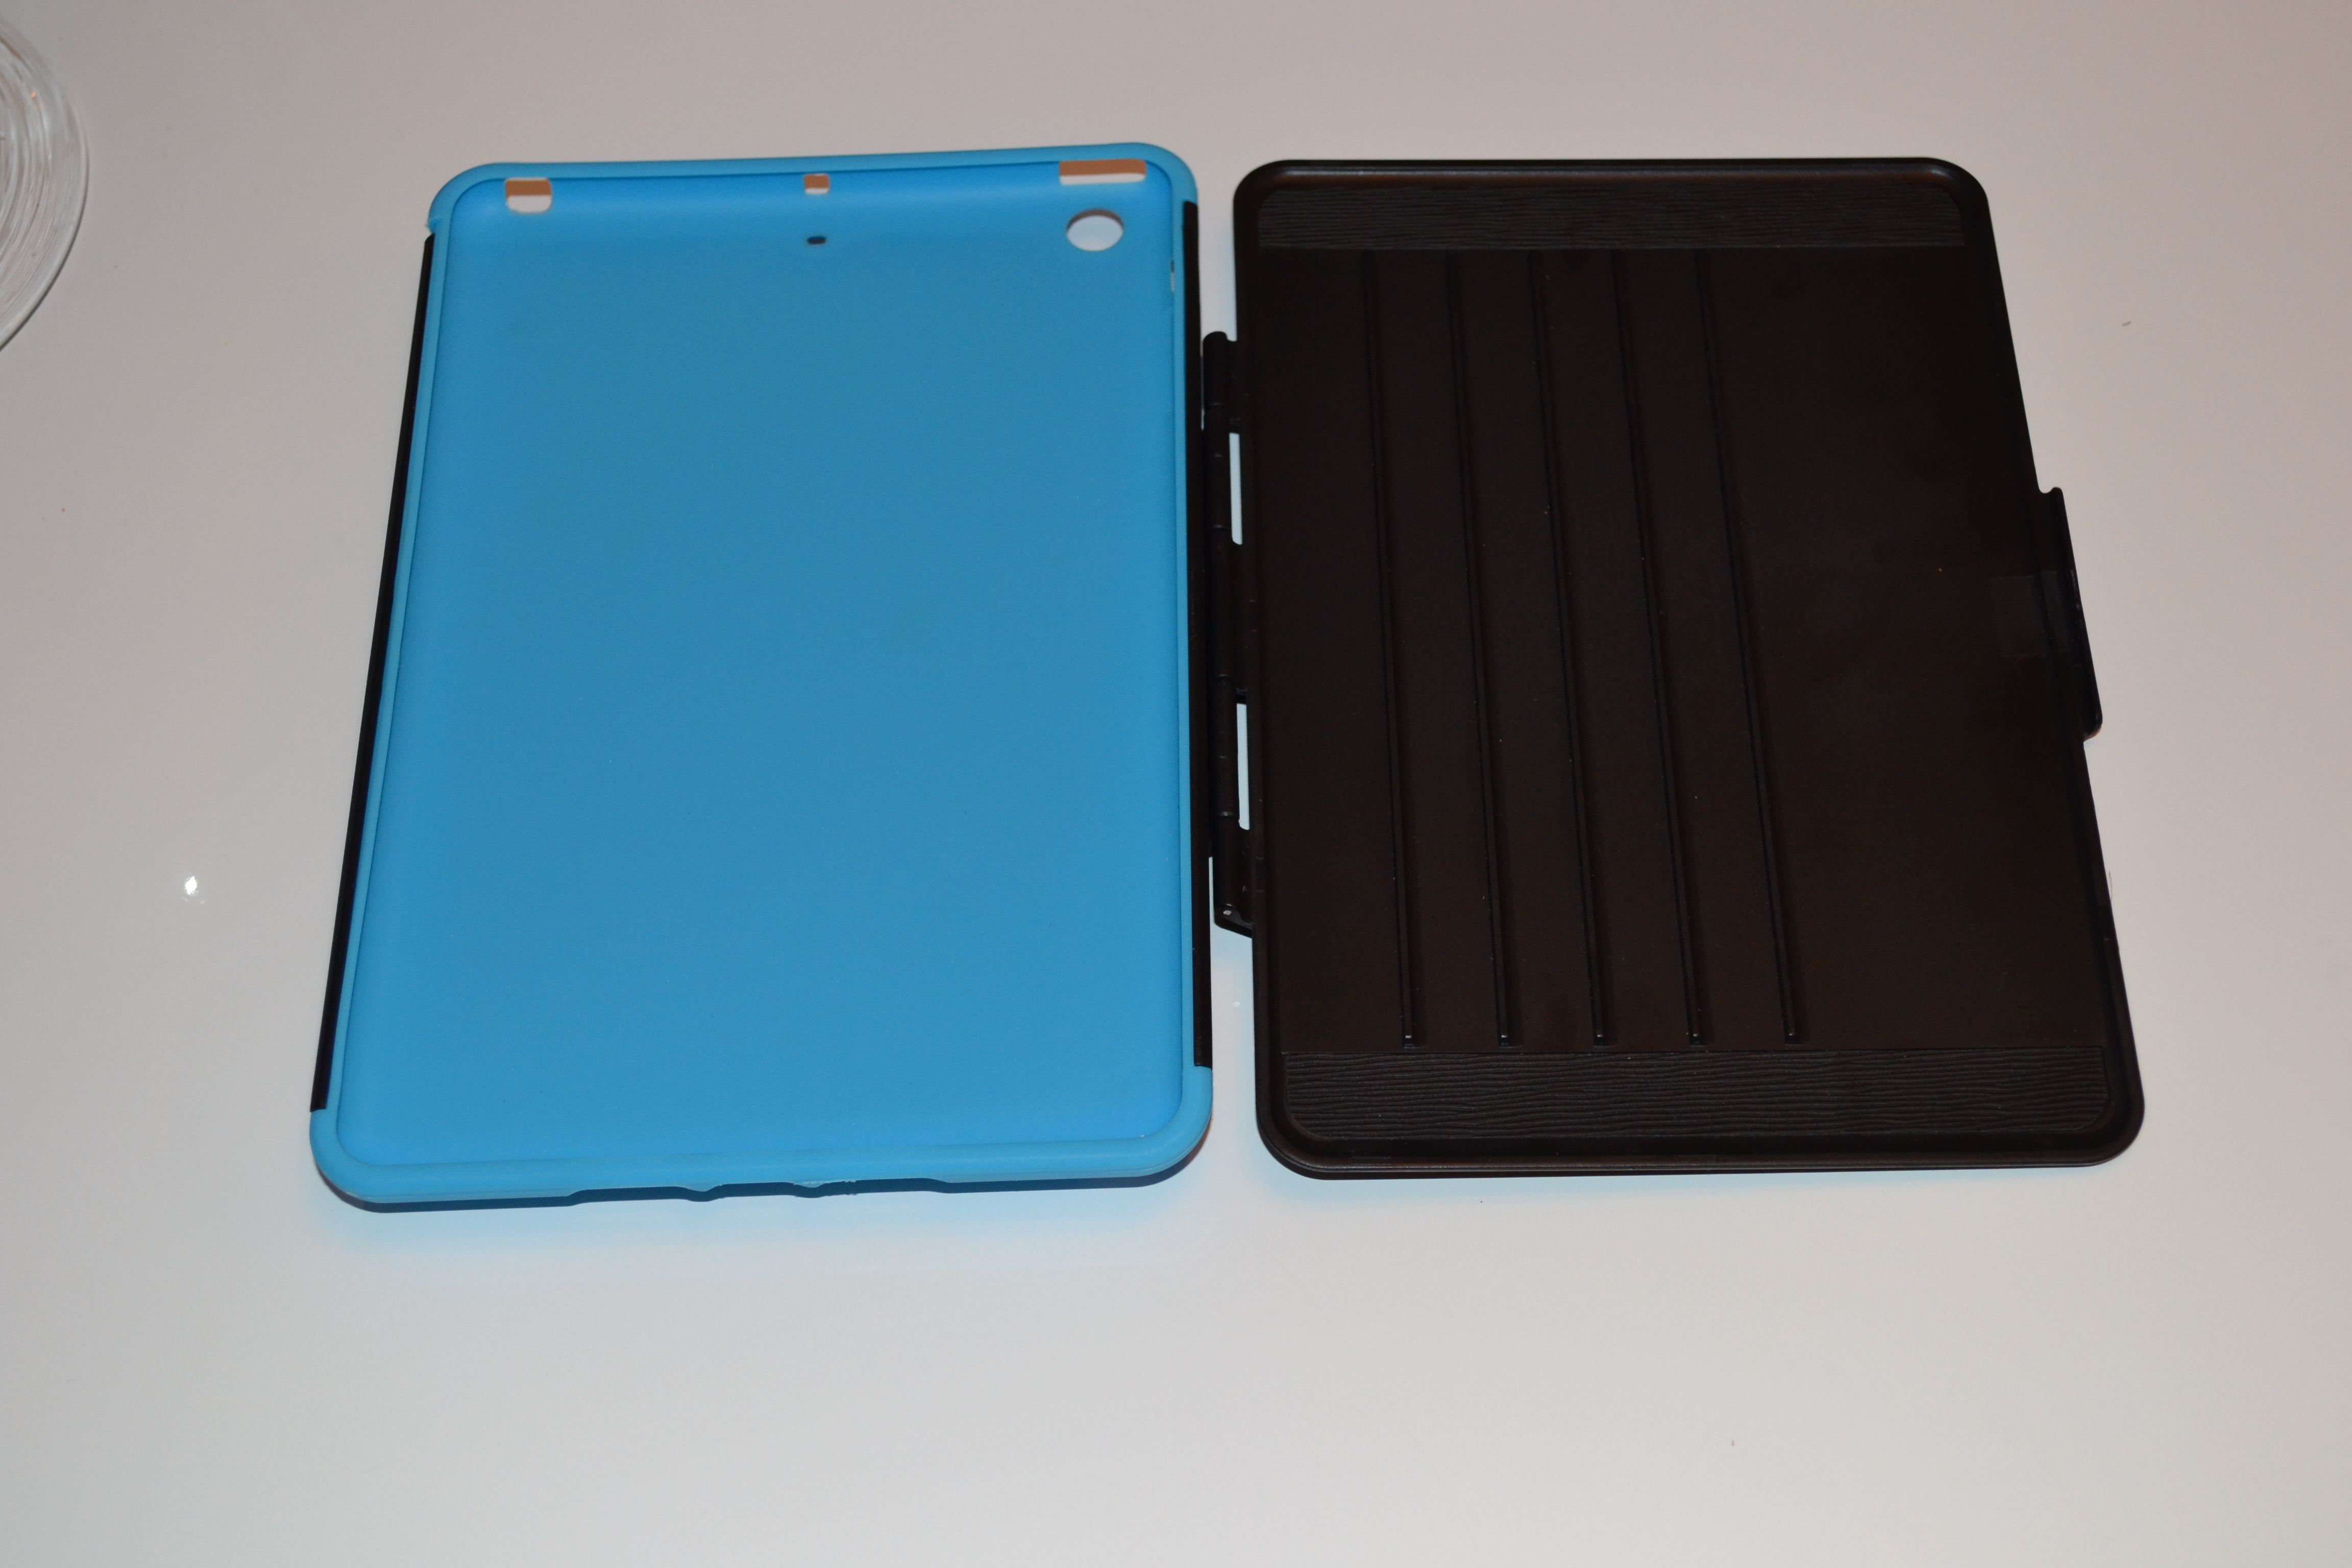 Caseit iPad mini clip on hard and rotating cases   Review.